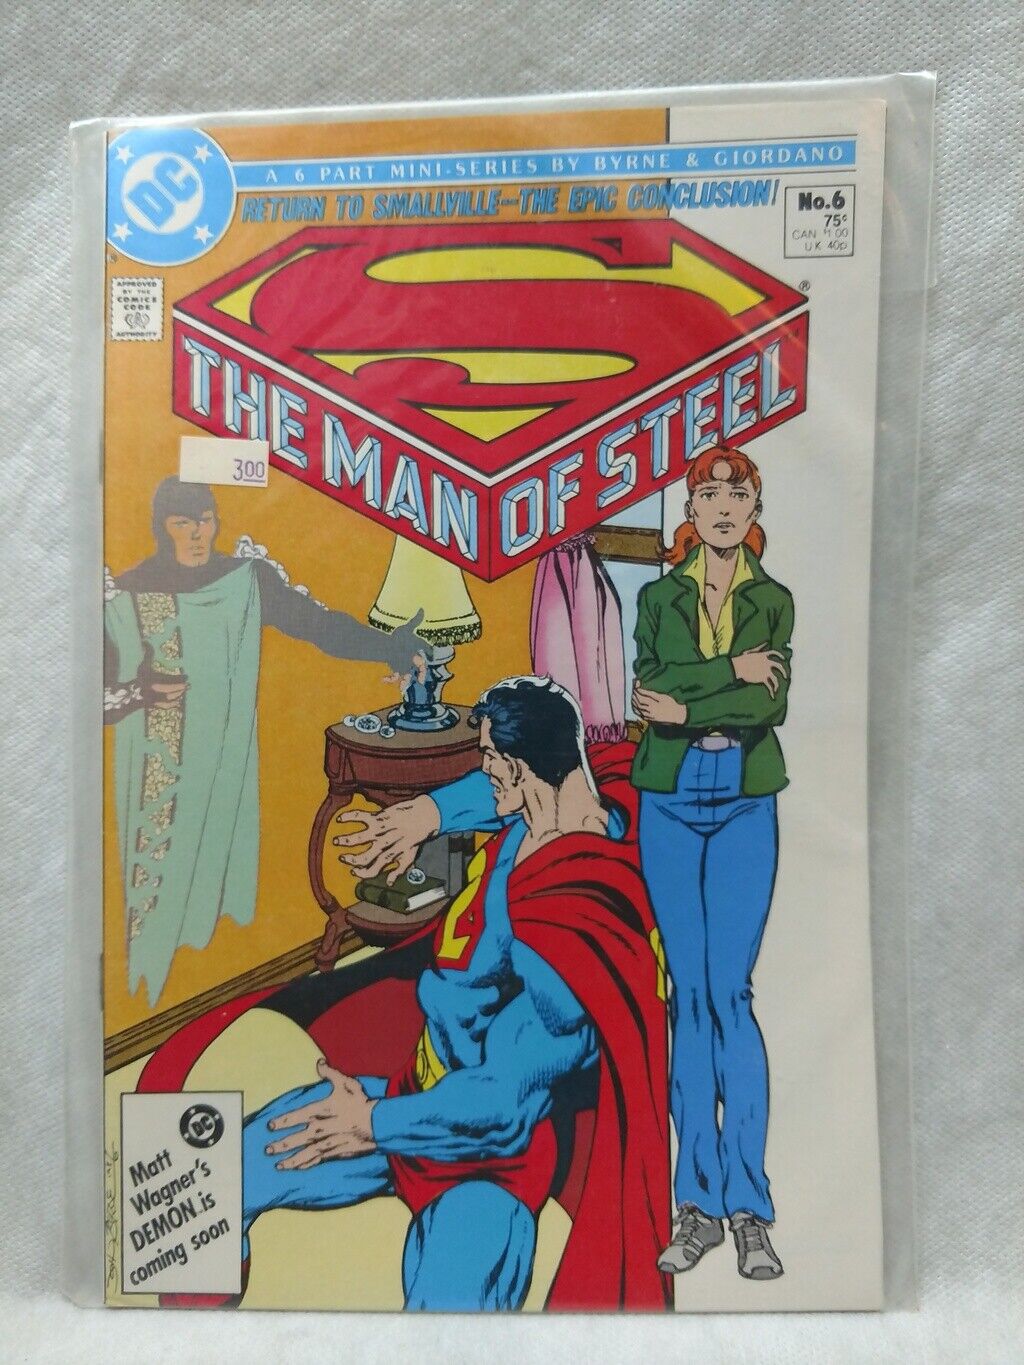 Vintage Protected-The Man of Steel #6, Return to Smallville-The Epic Conclusion